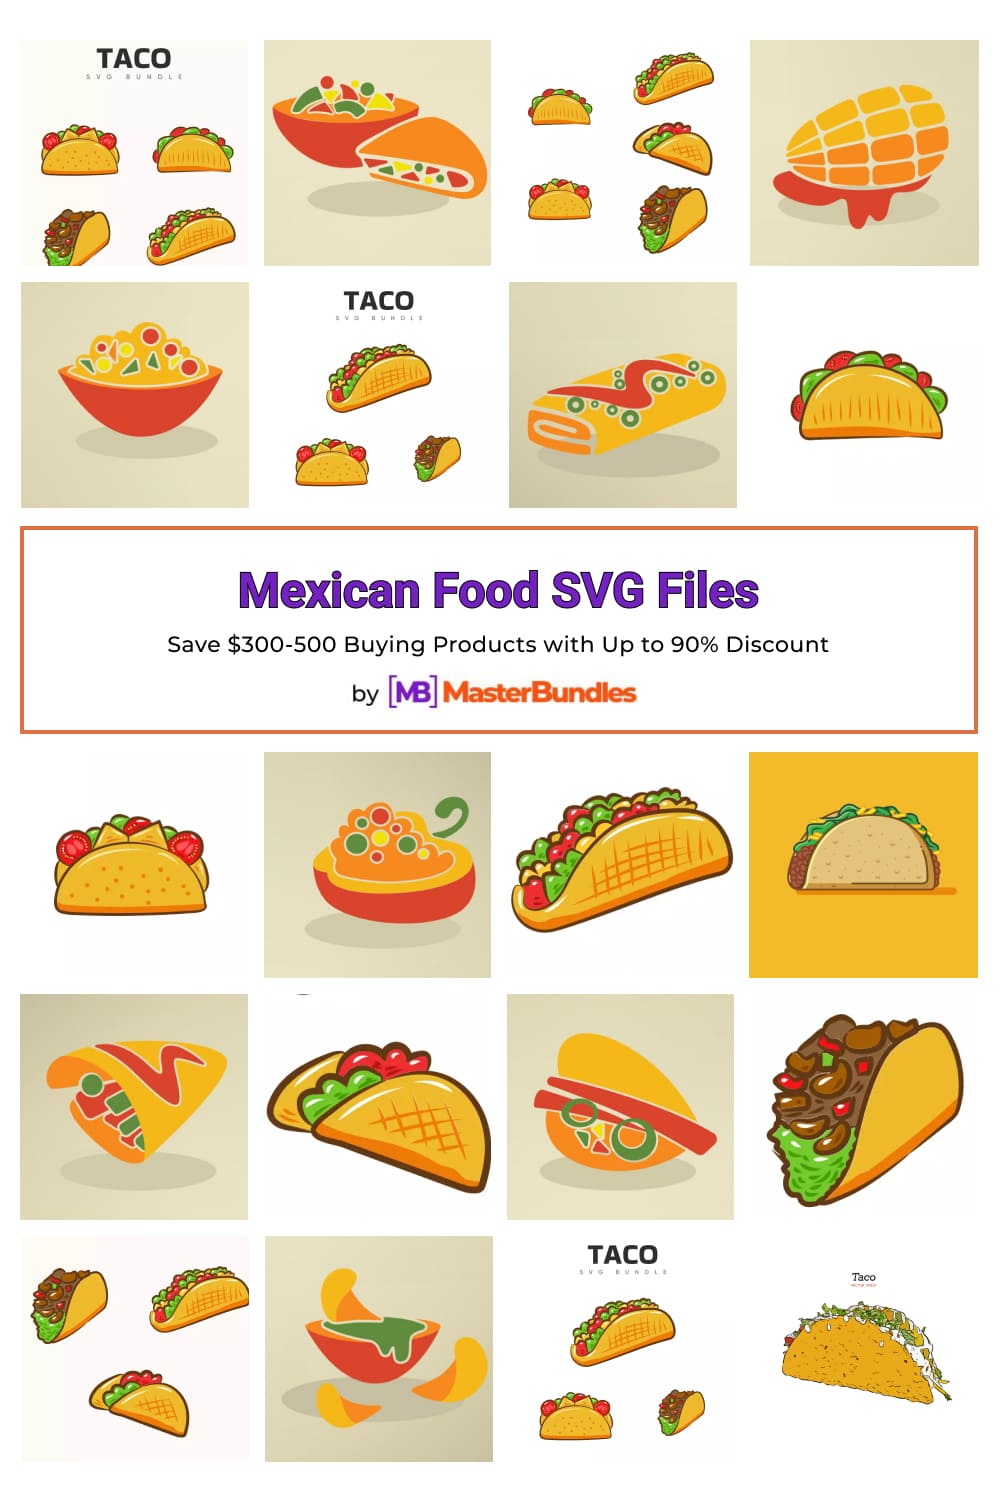 Mexican Food SVG Files Pinterest image.